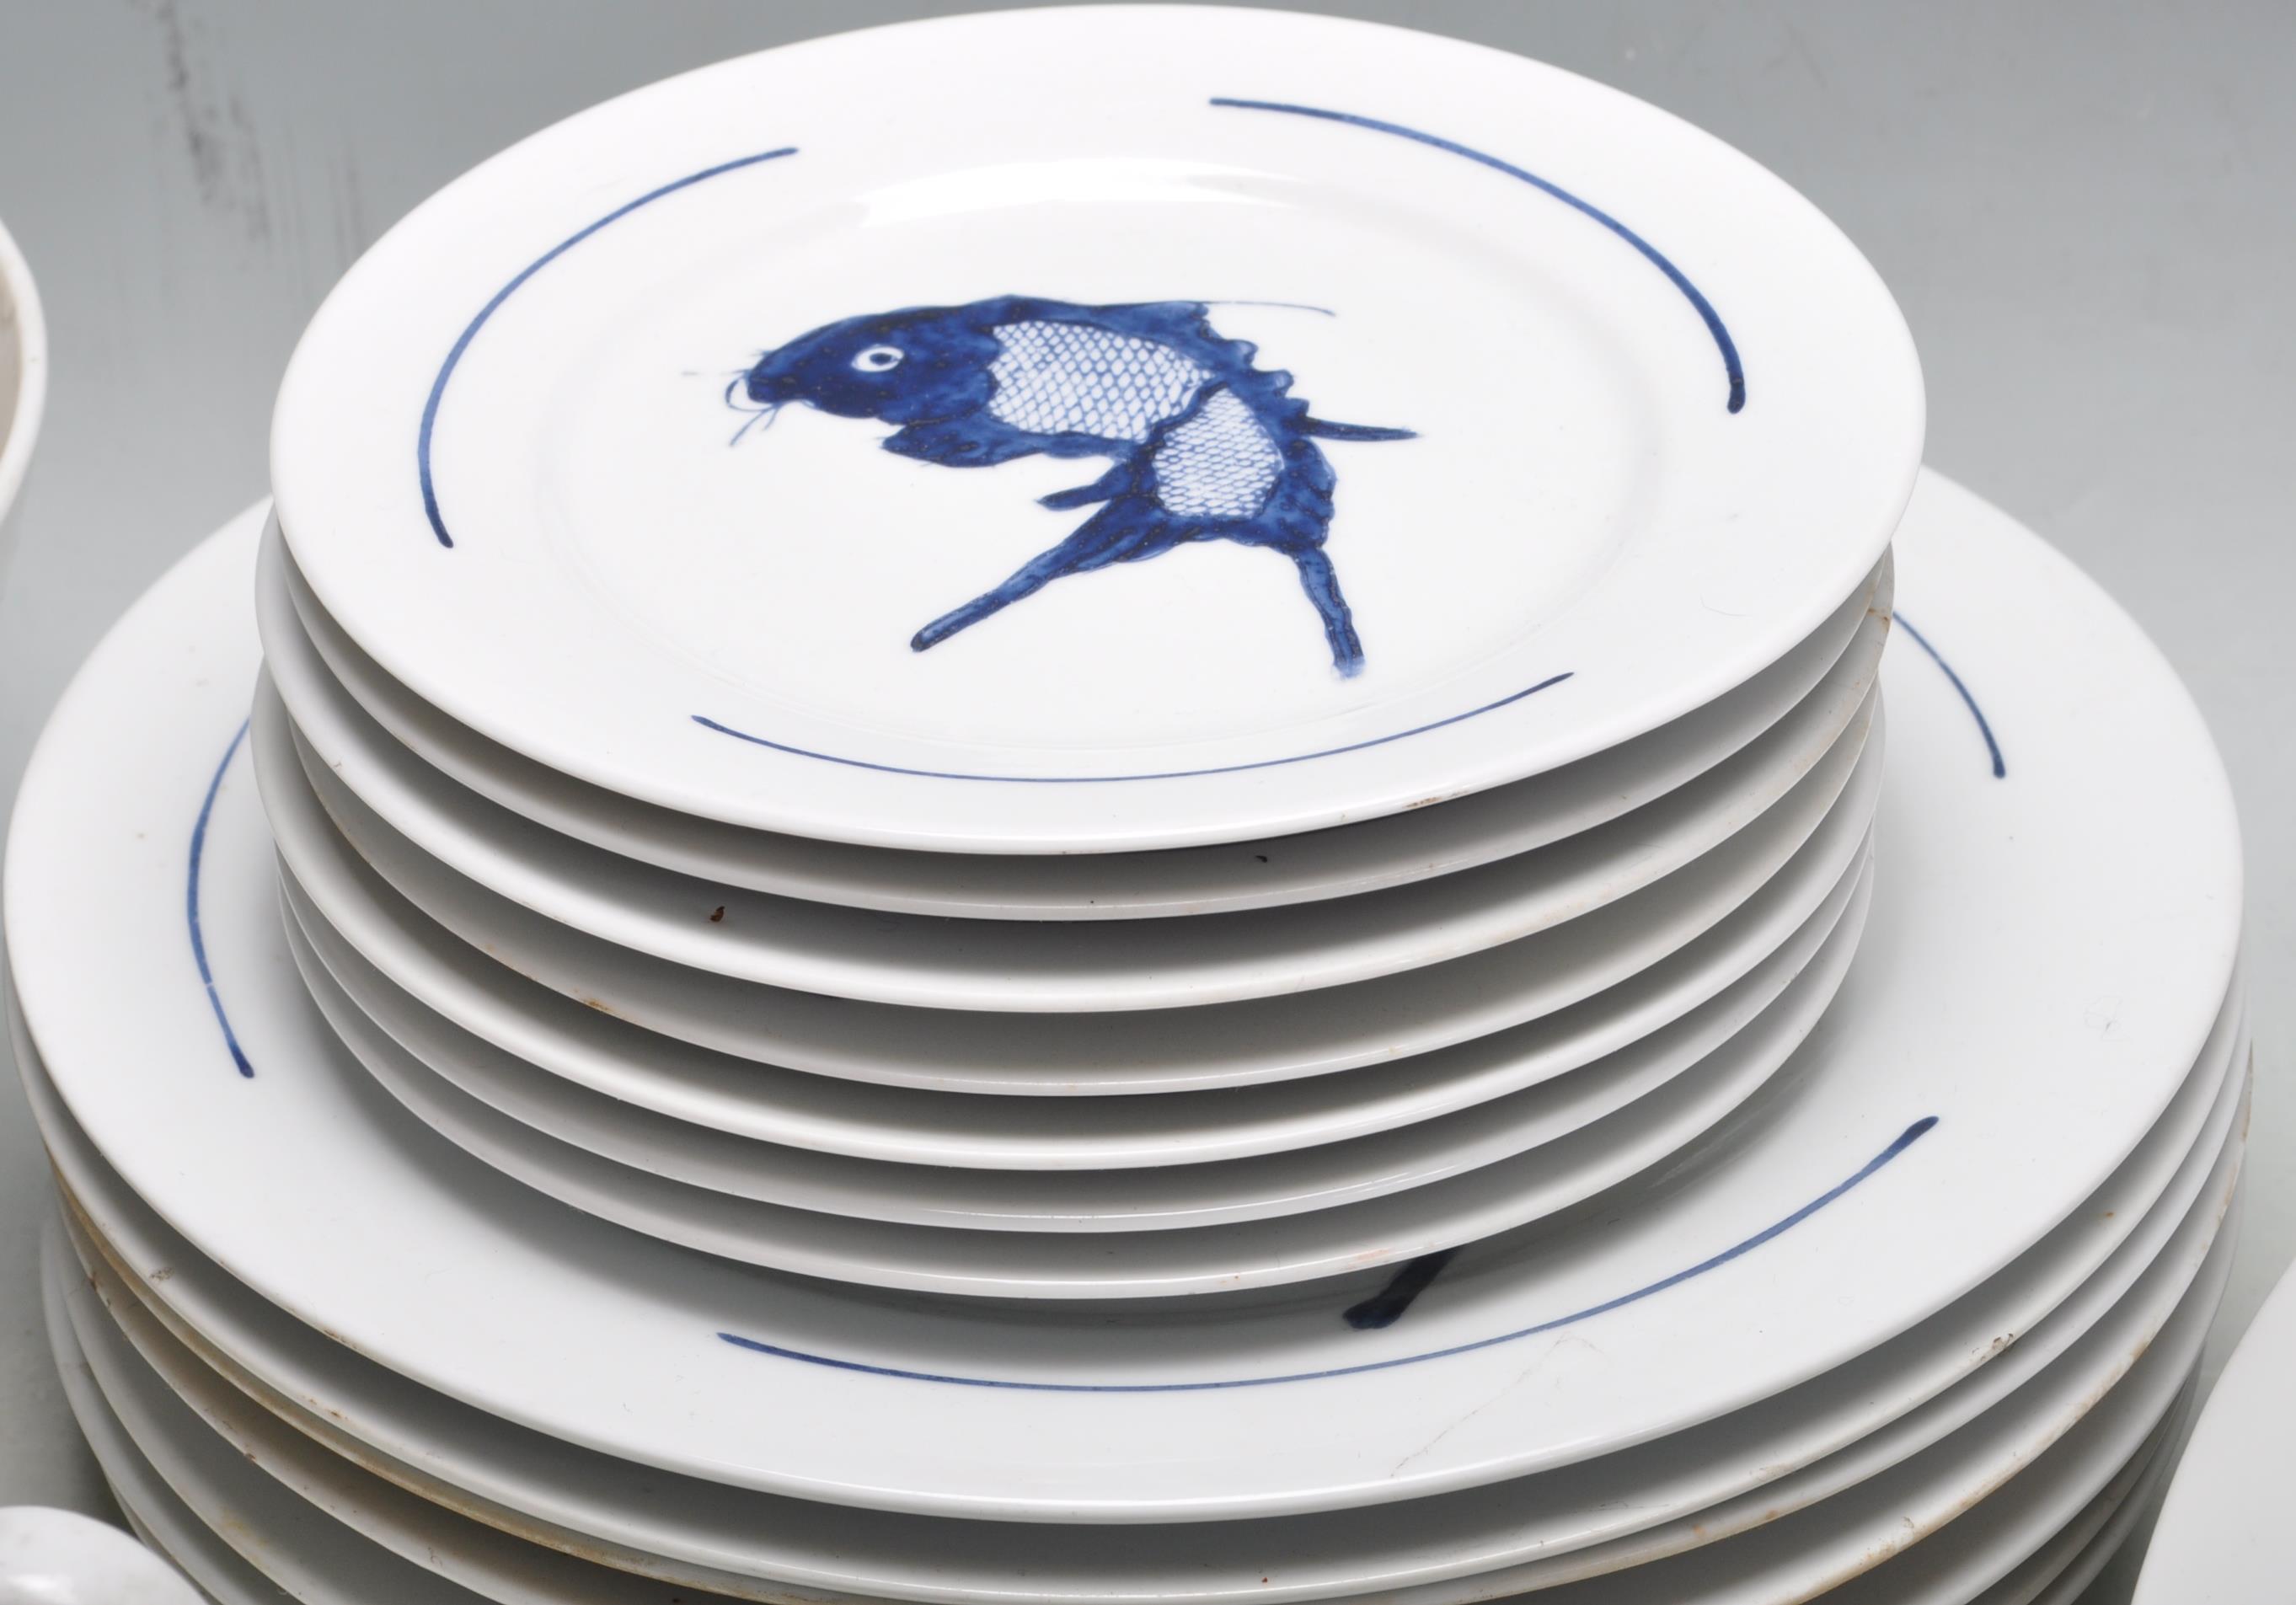 MID 20TH CENTURY RAOPING KOI CARP BLUE AND WHITE DINNER SERVICE - Image 7 of 9